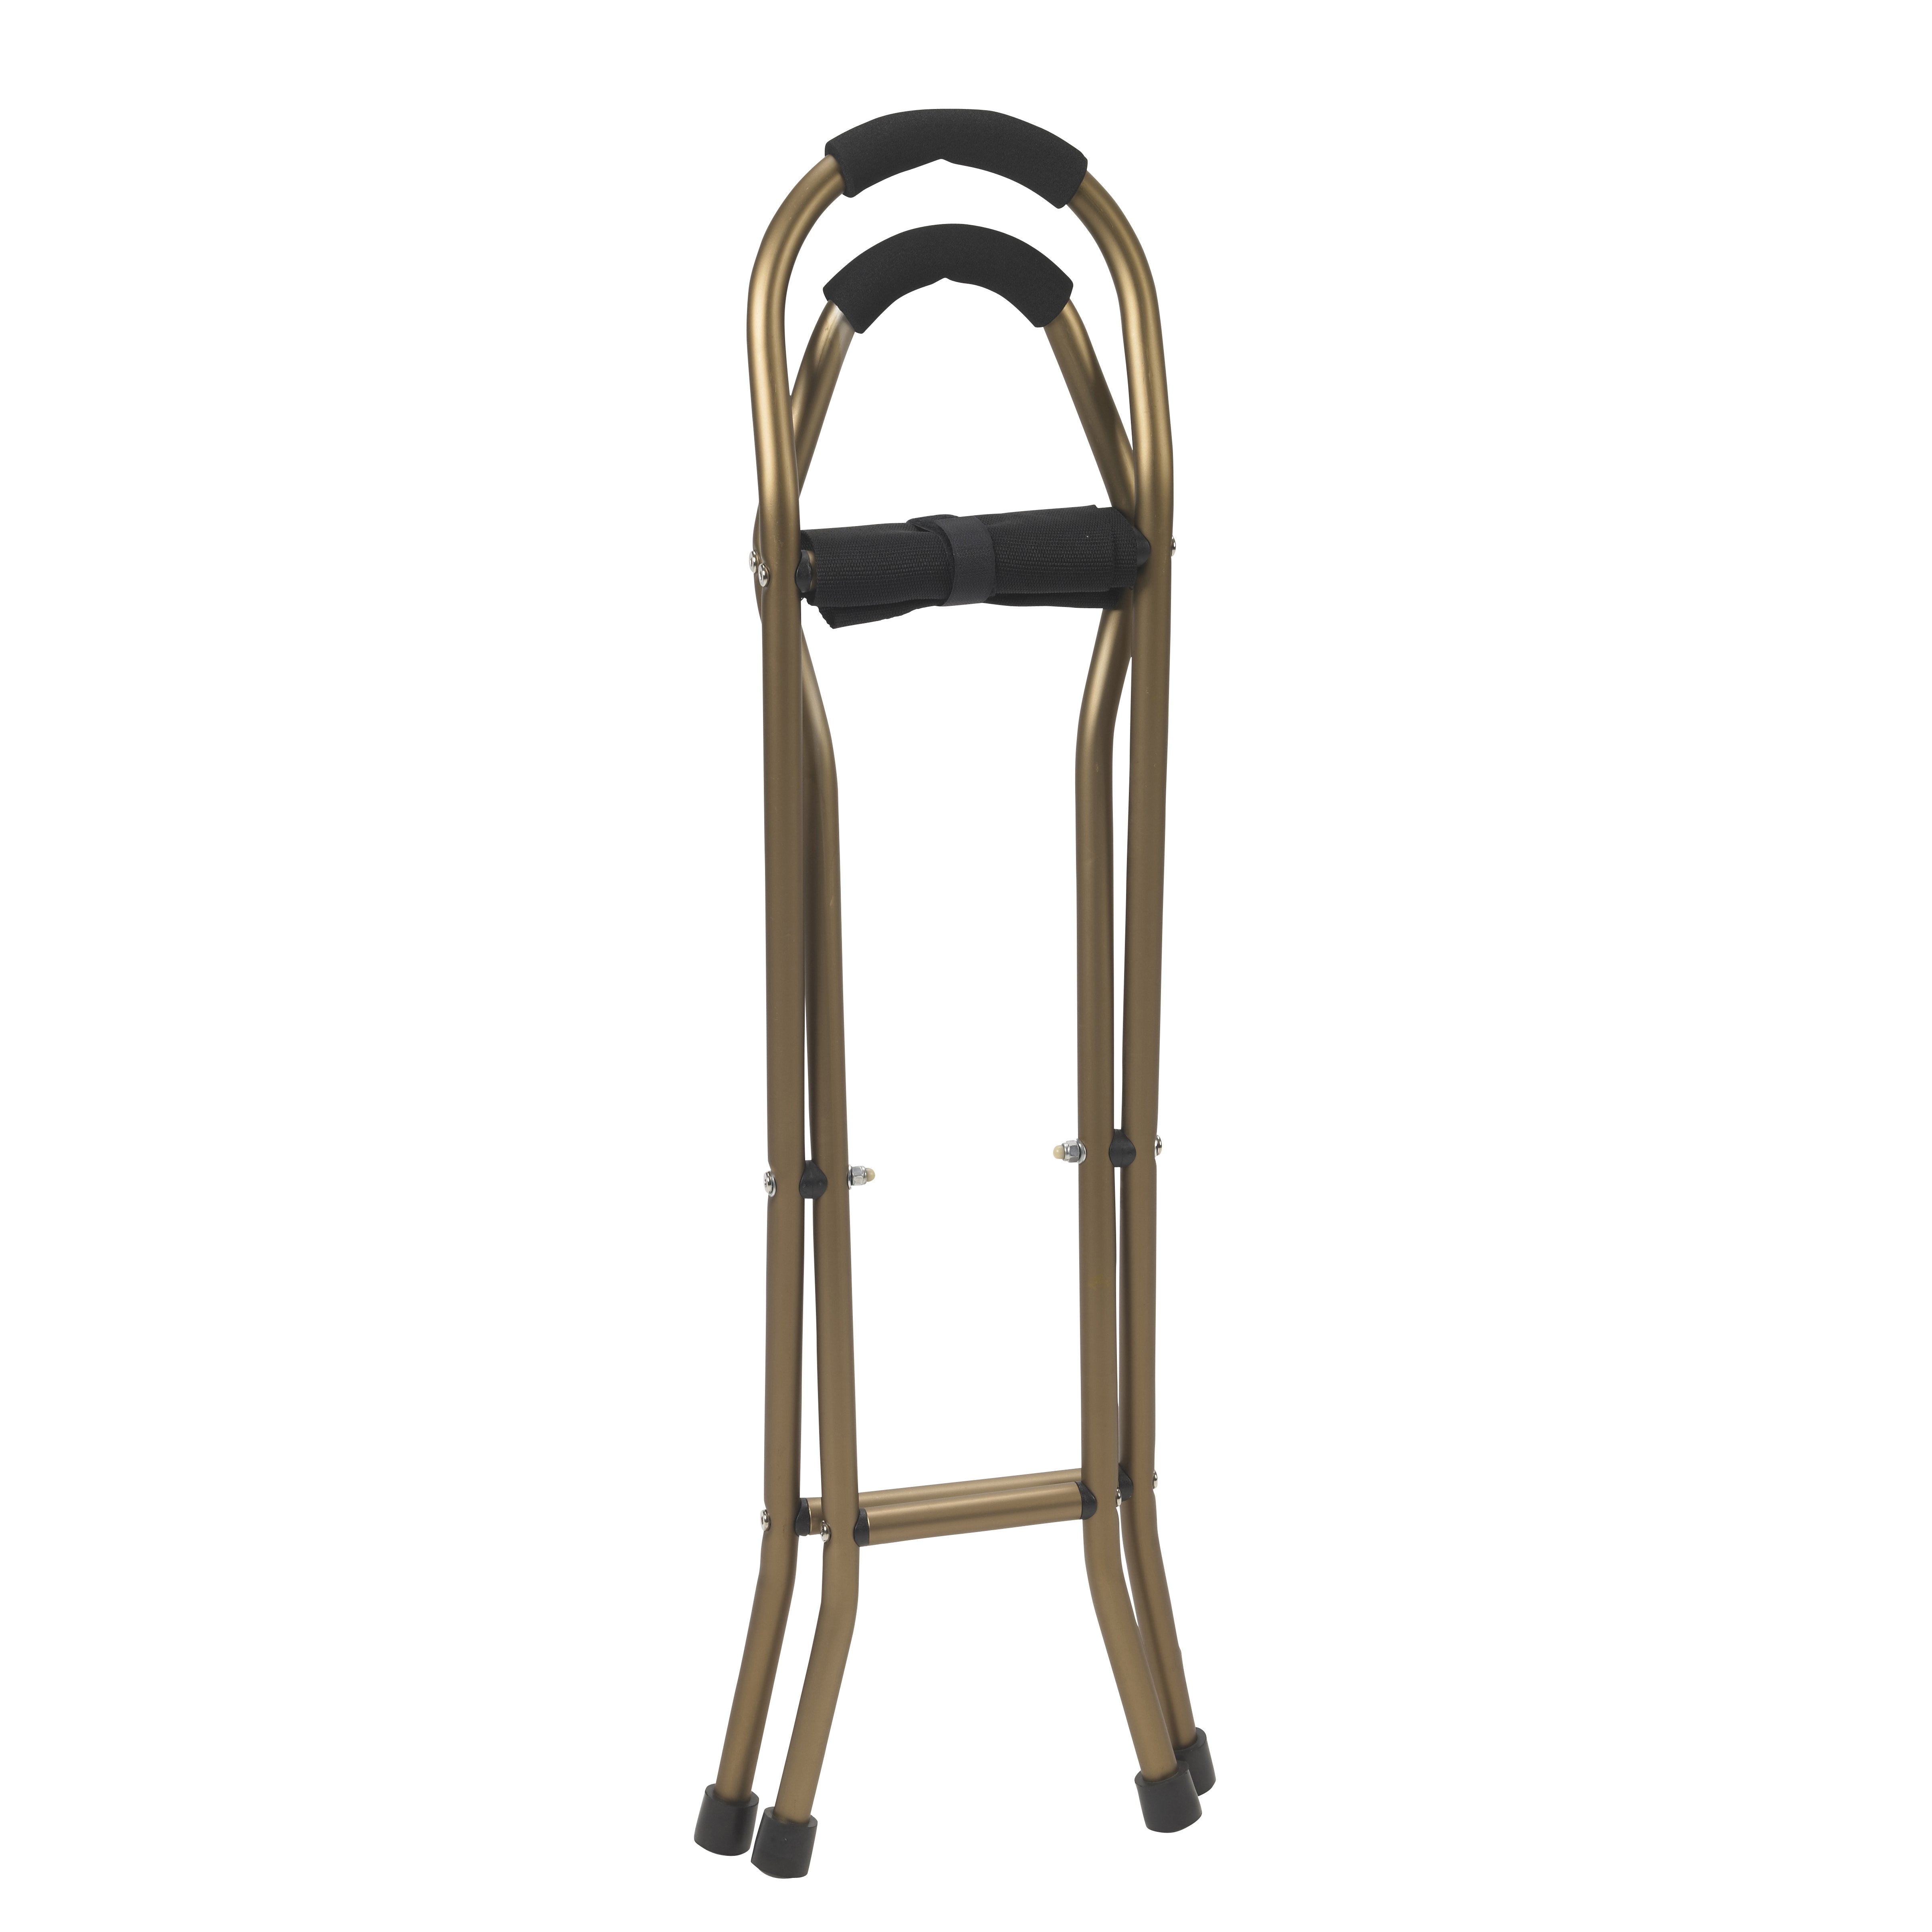 Quad Cane with Sling Seat drive™ Aluminum 34 Inch Height Bronze